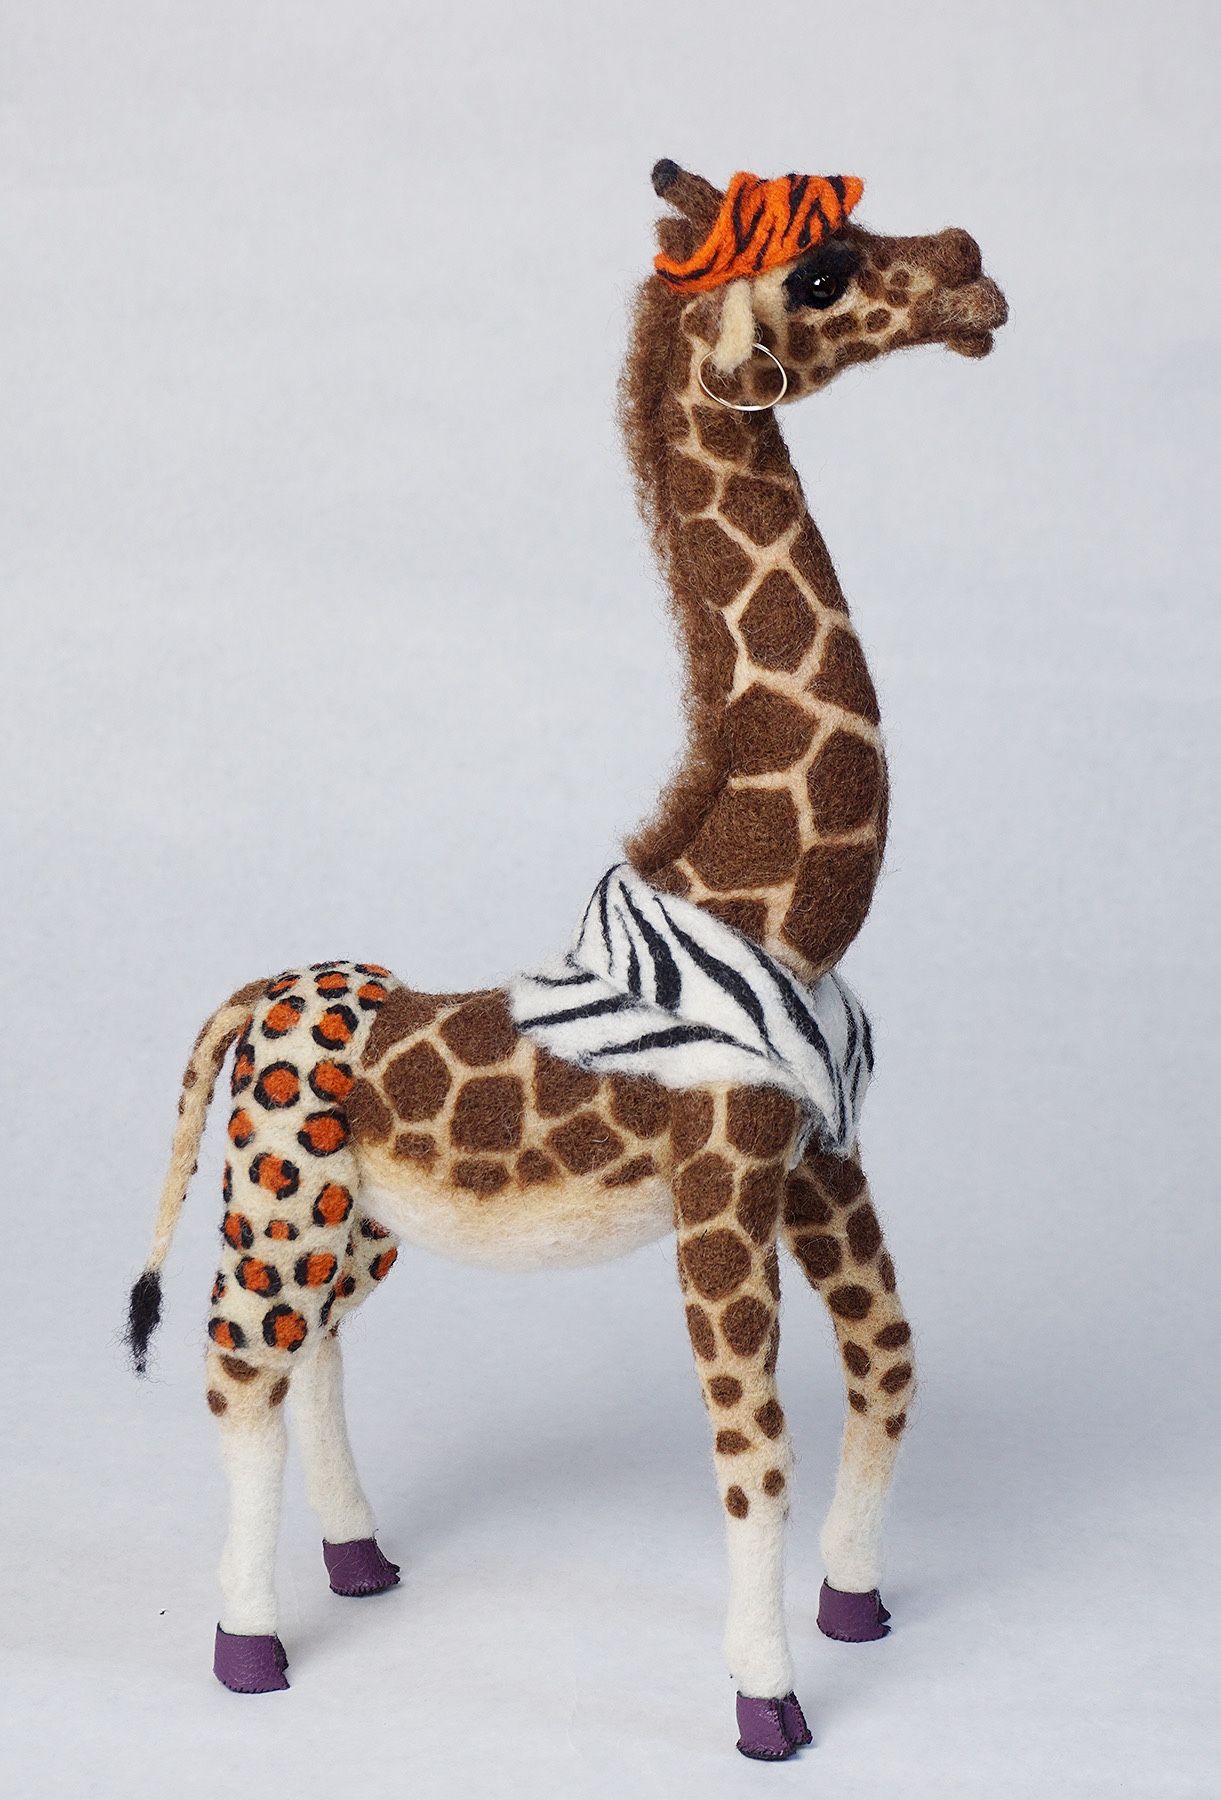 Dare to clash anthropomorphic giraffe sculpture, one of a kind needle felted art doll sculpture.